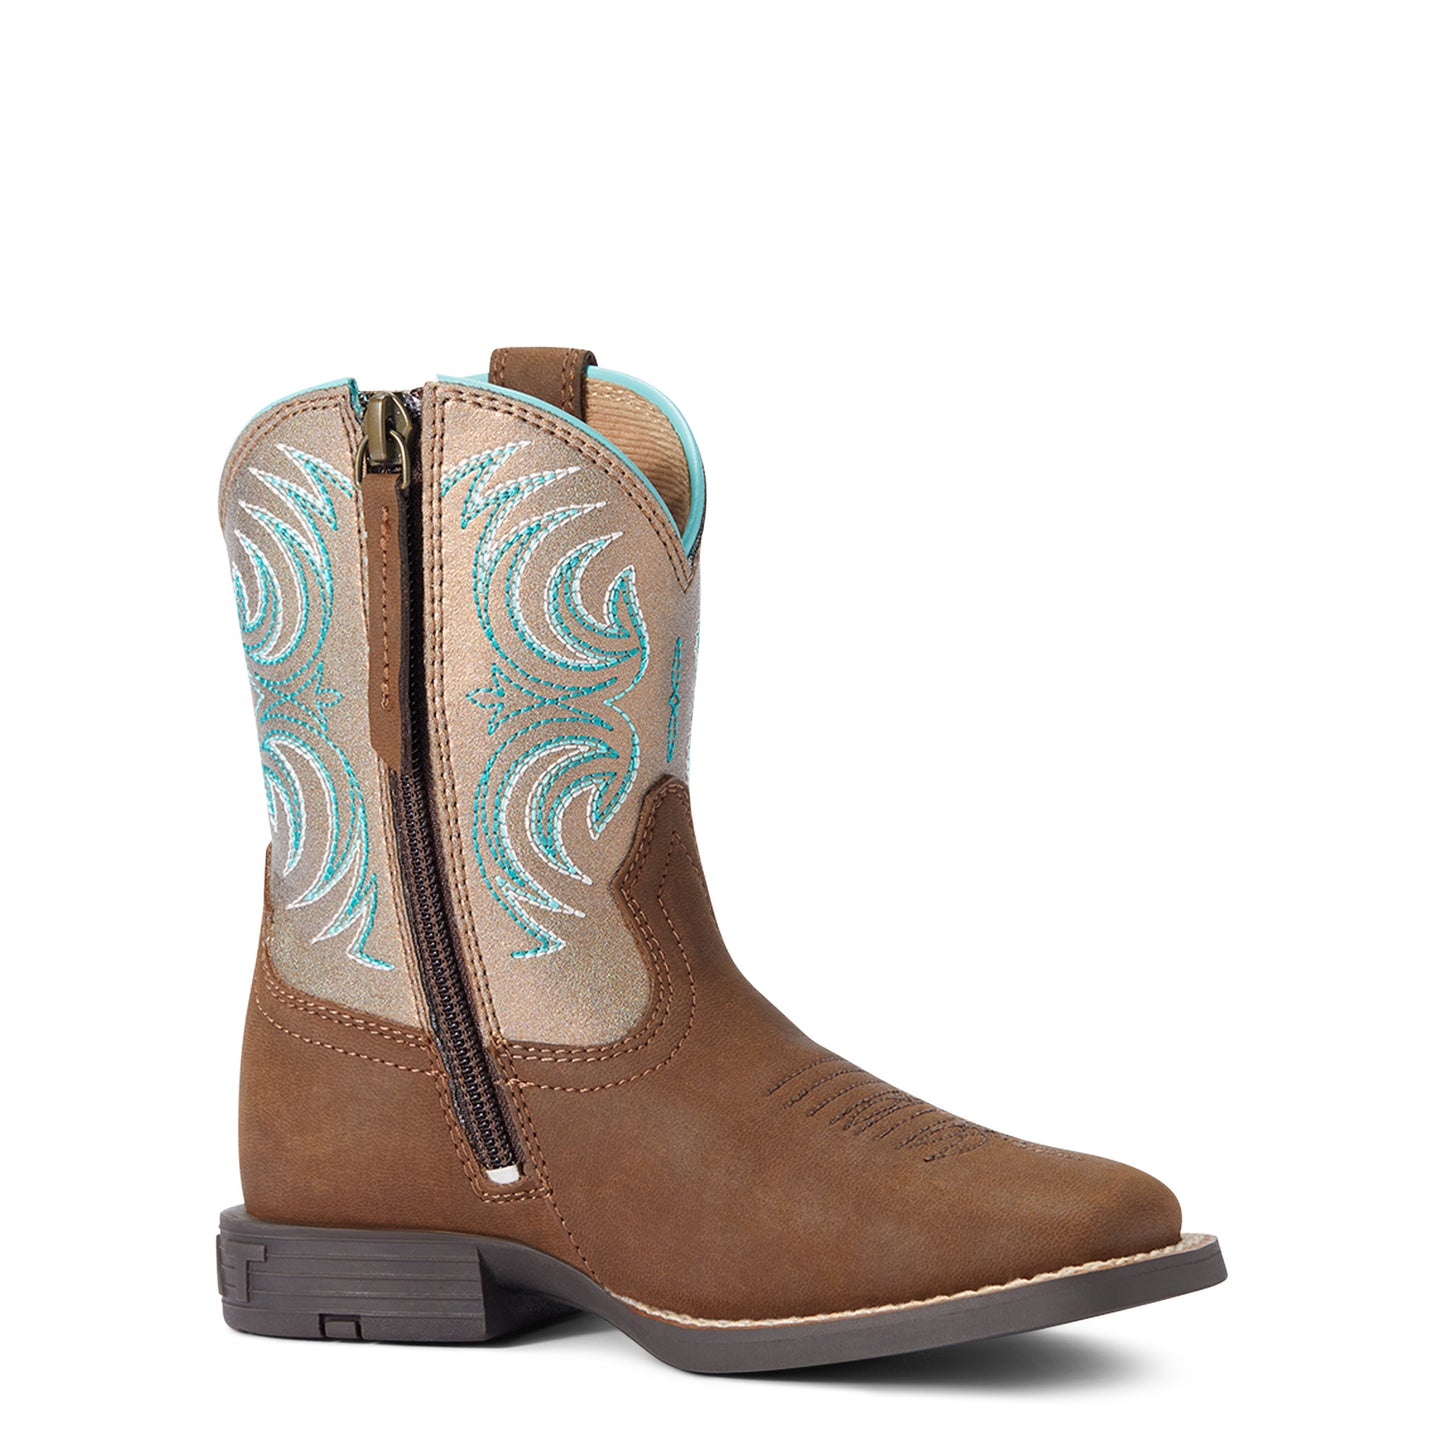 Ariat Storm Boot - Rich Clay